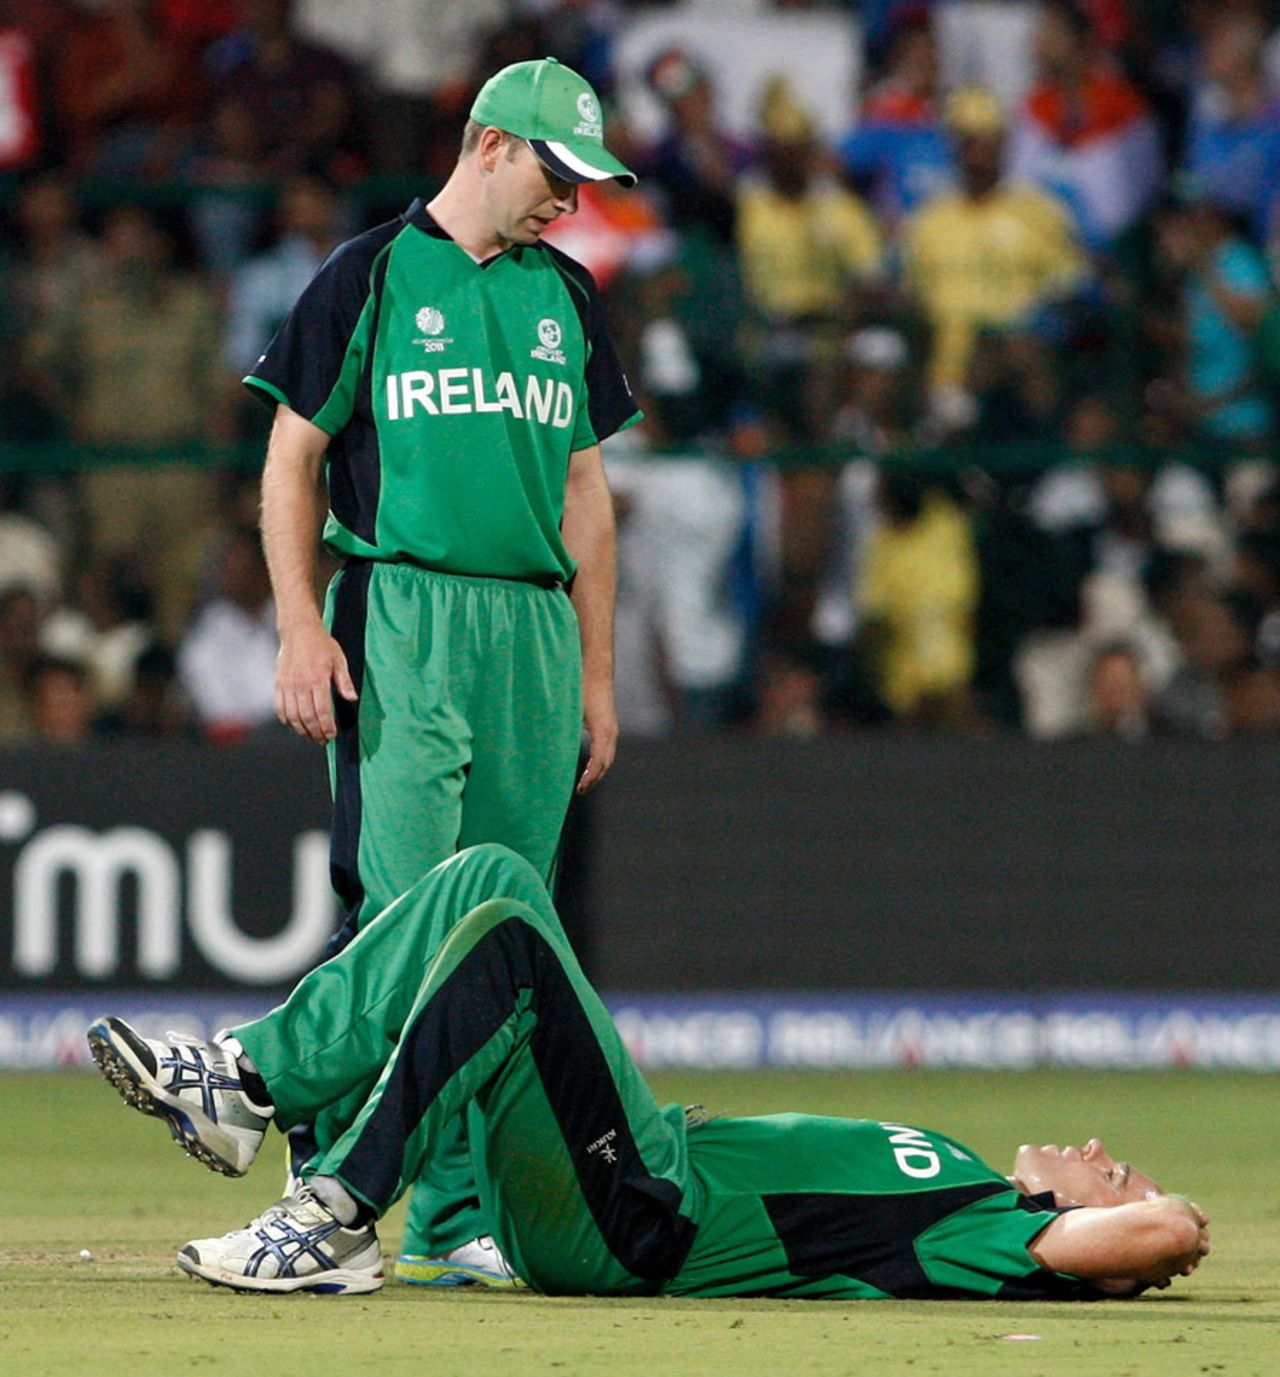 Trent Johnston goes down with a knee injury, India v Ireland, Group B, World Cup 2011, Bangalore, March 6, 2011